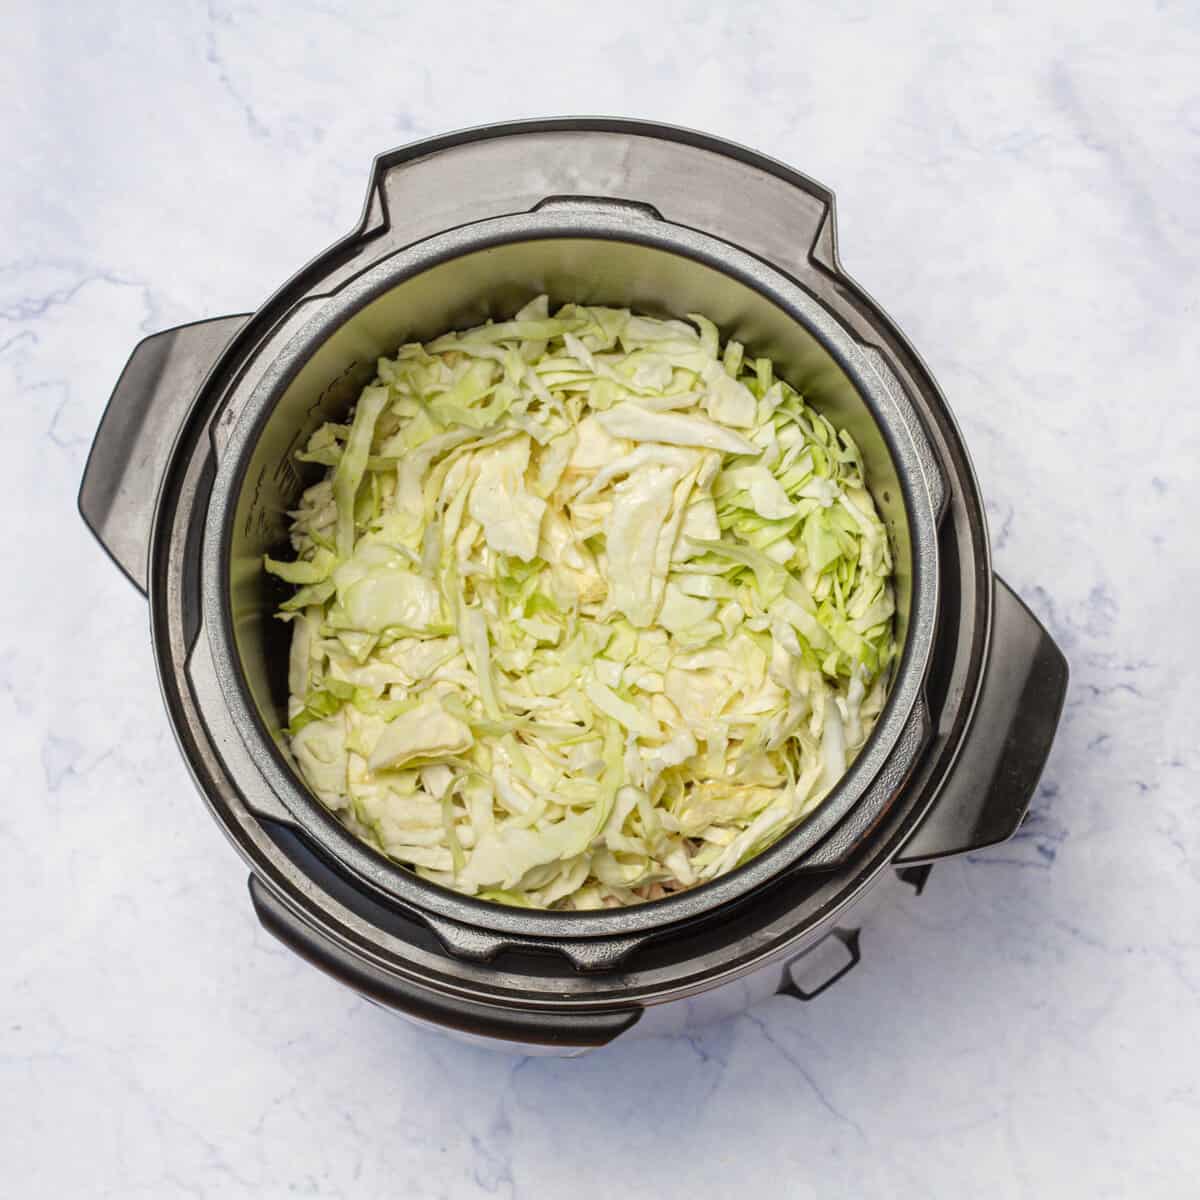 add the finely chopped cabbage to the pot